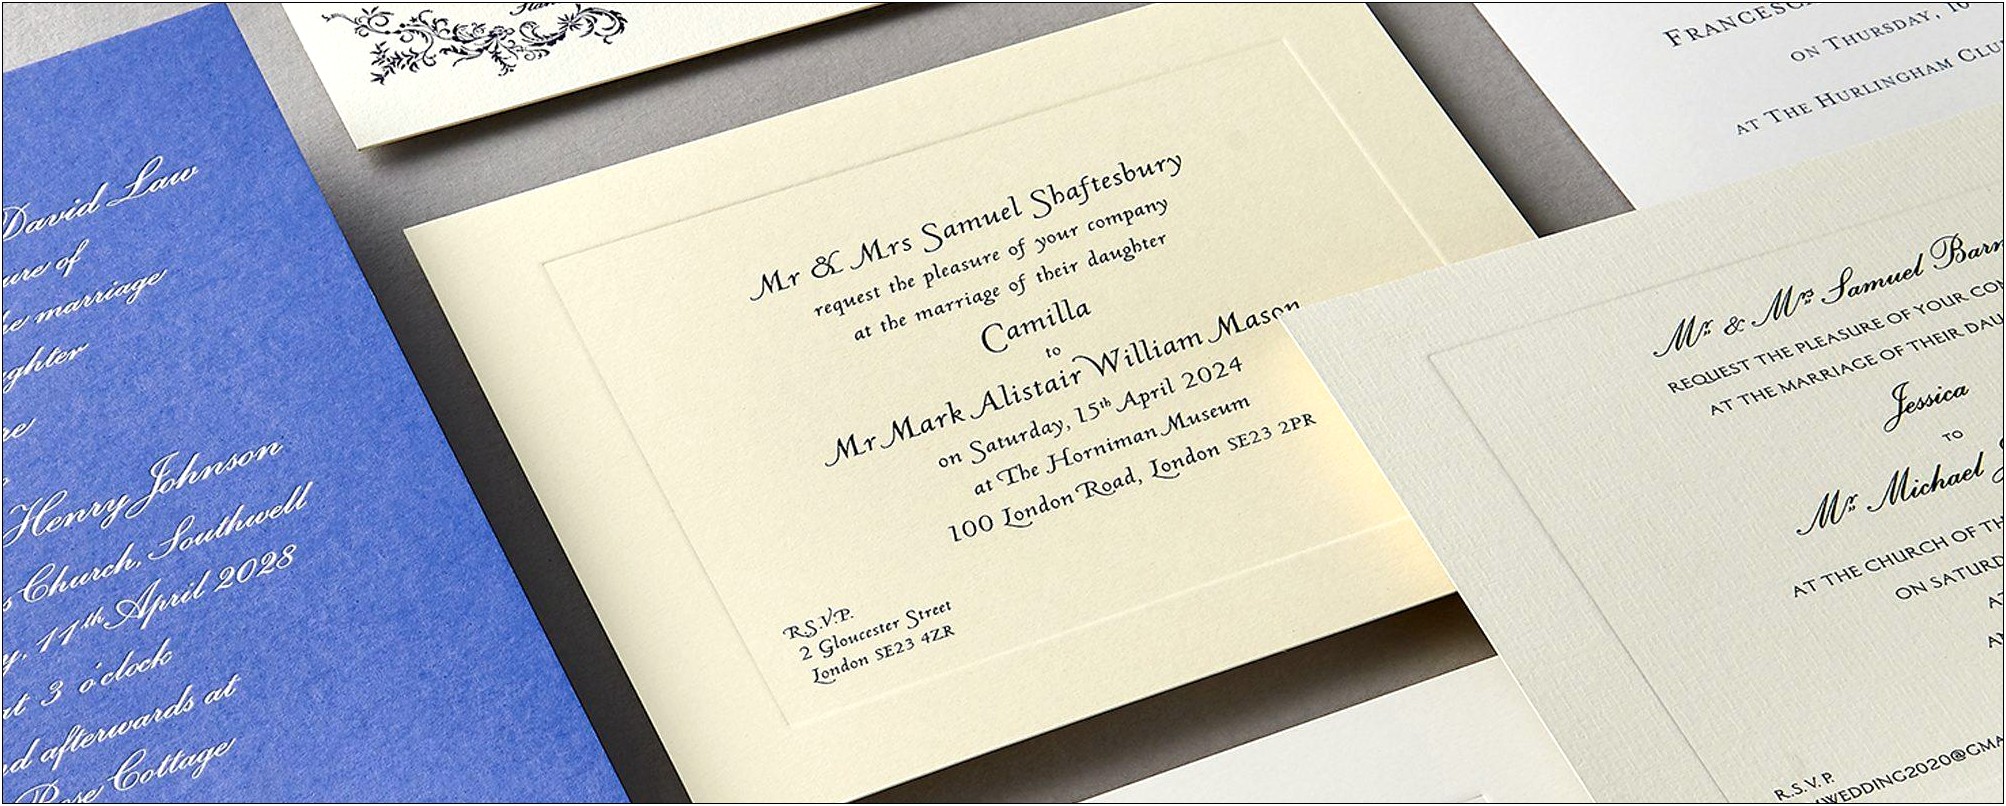 Best Cardstock For Printing Wedding Invitations At Home